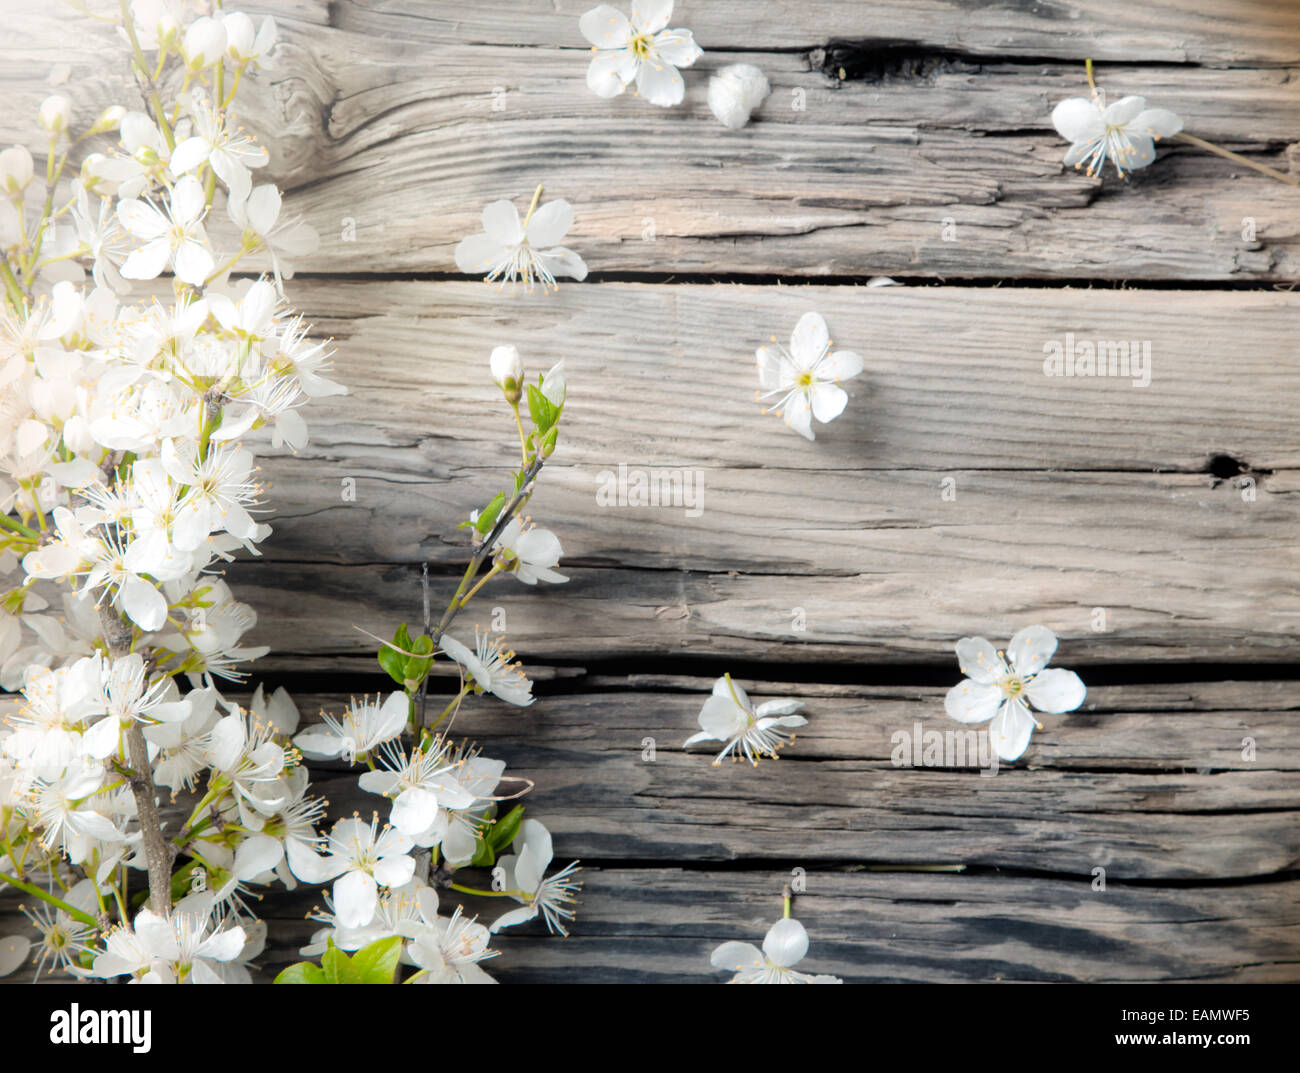 Spring white blossoms on wooden planks surface. Free space for text Stock Photo